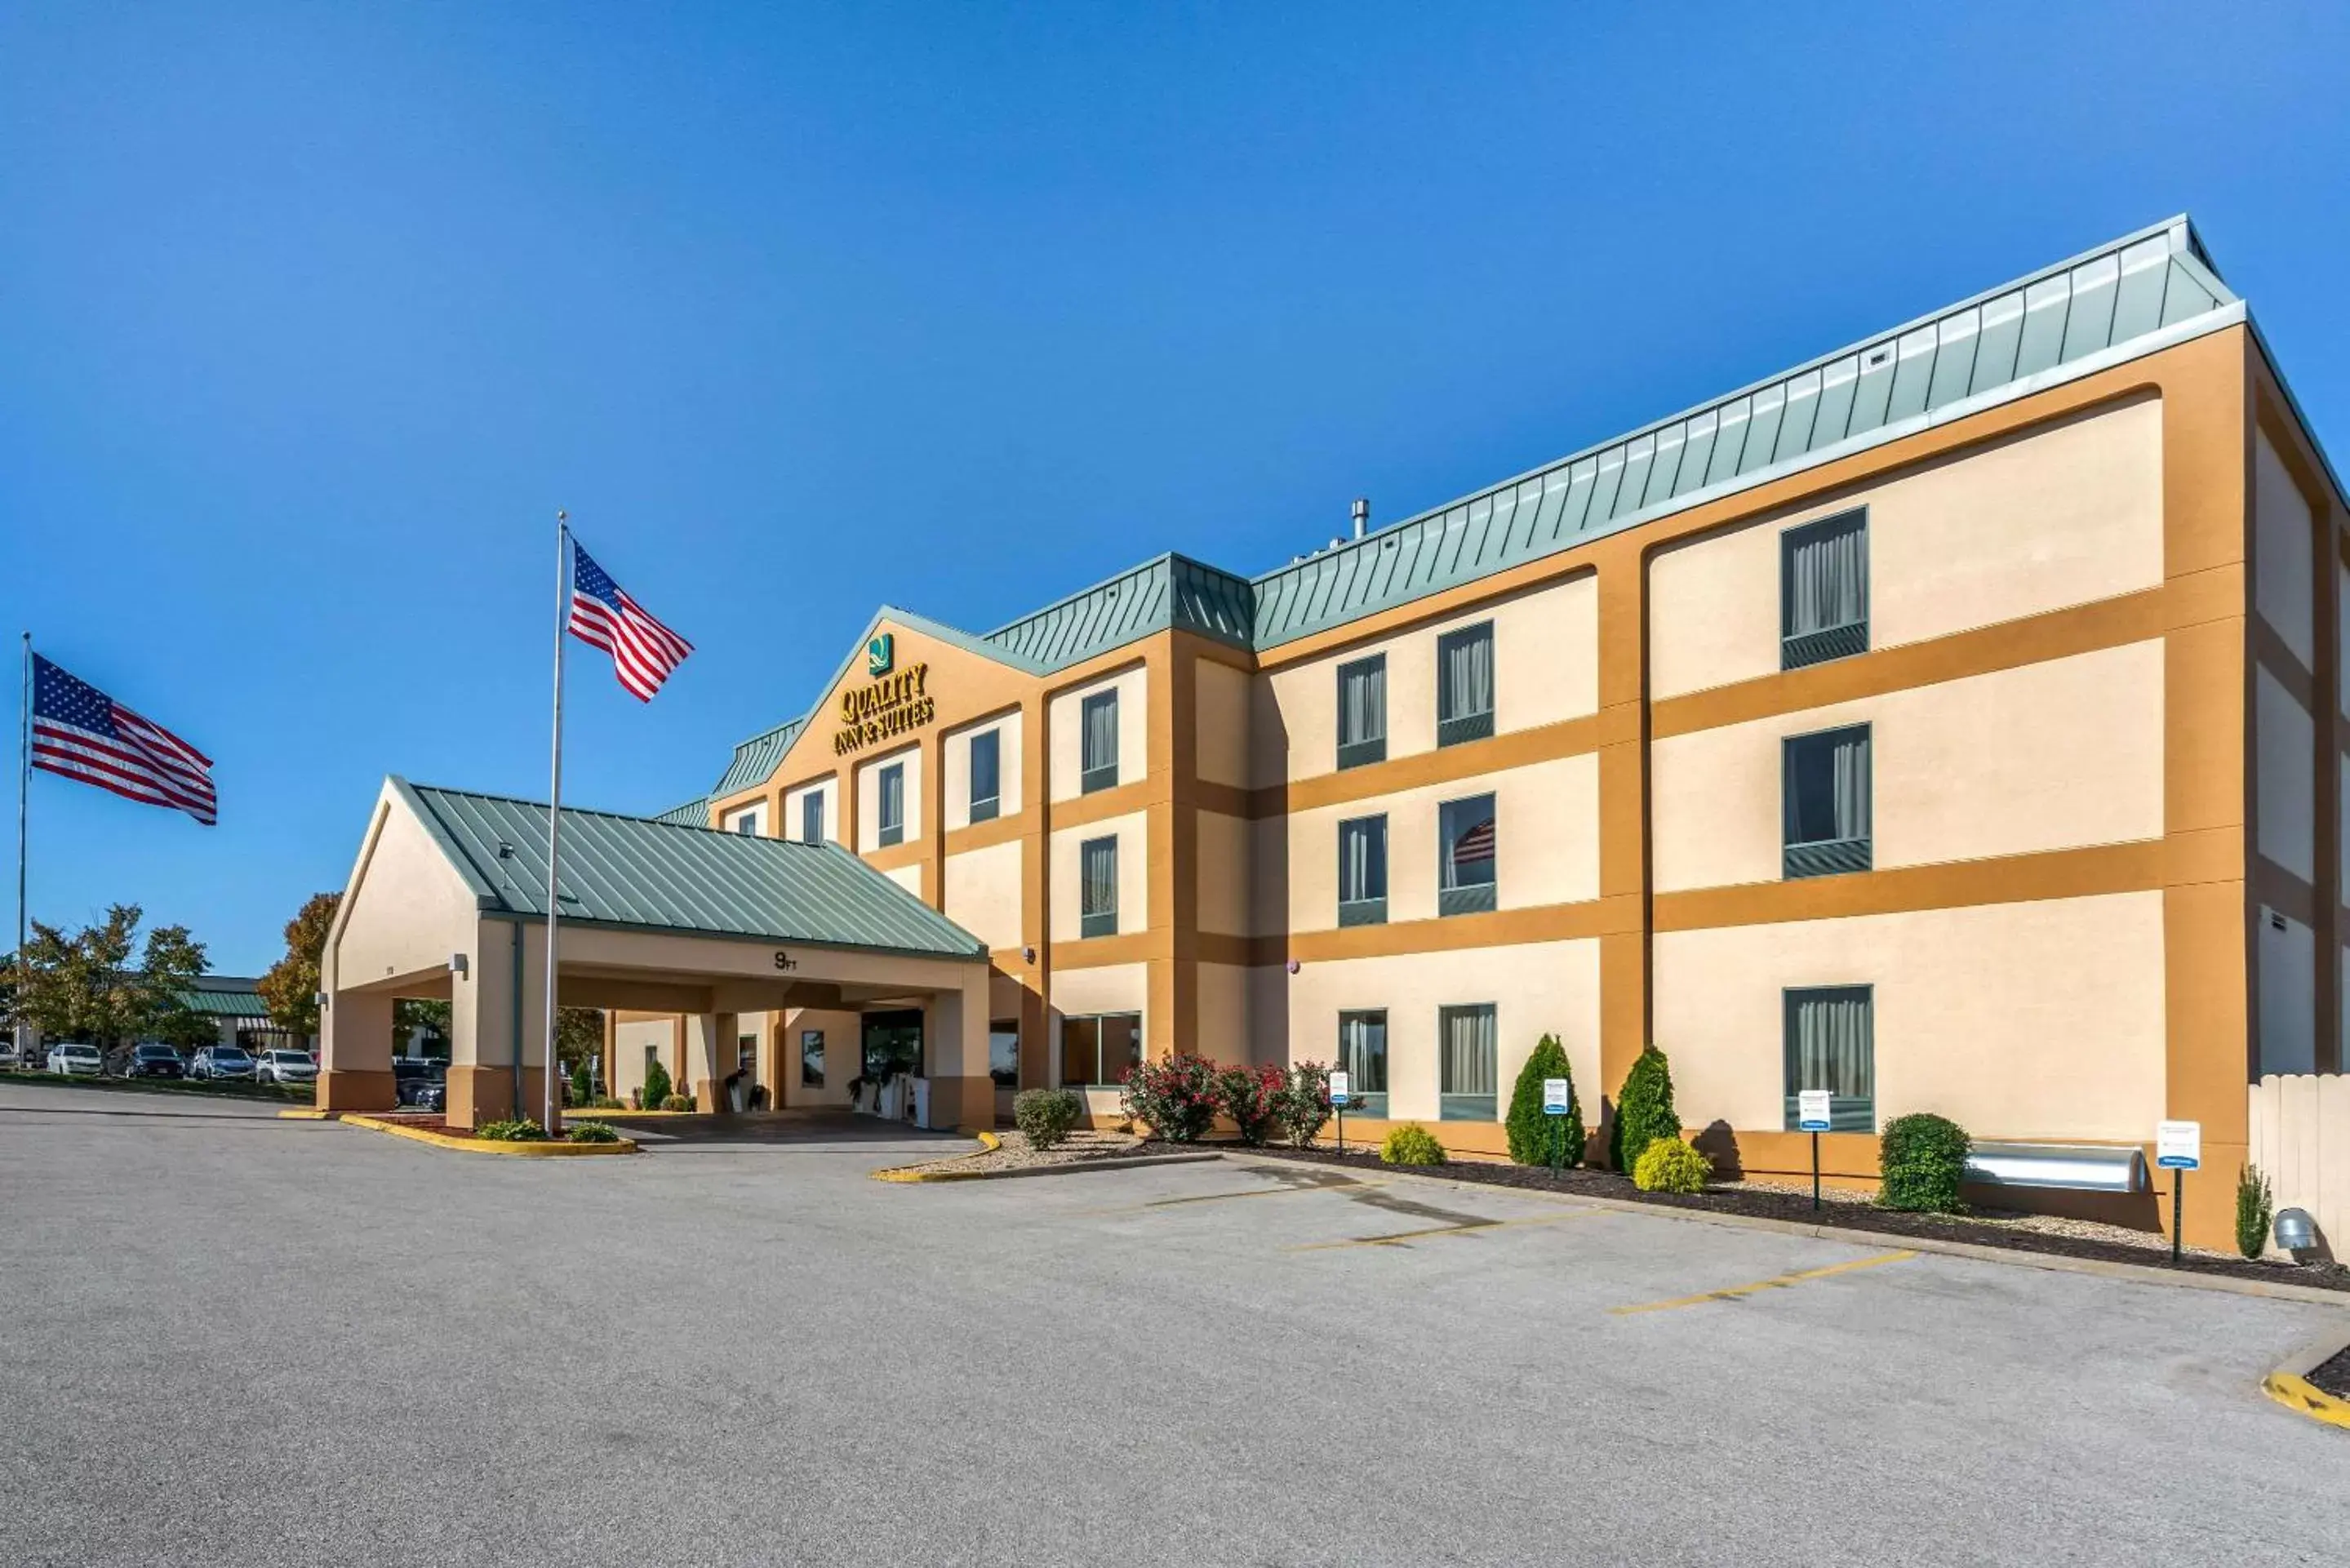 Property building in Quality Inn & Suites - Jefferson City